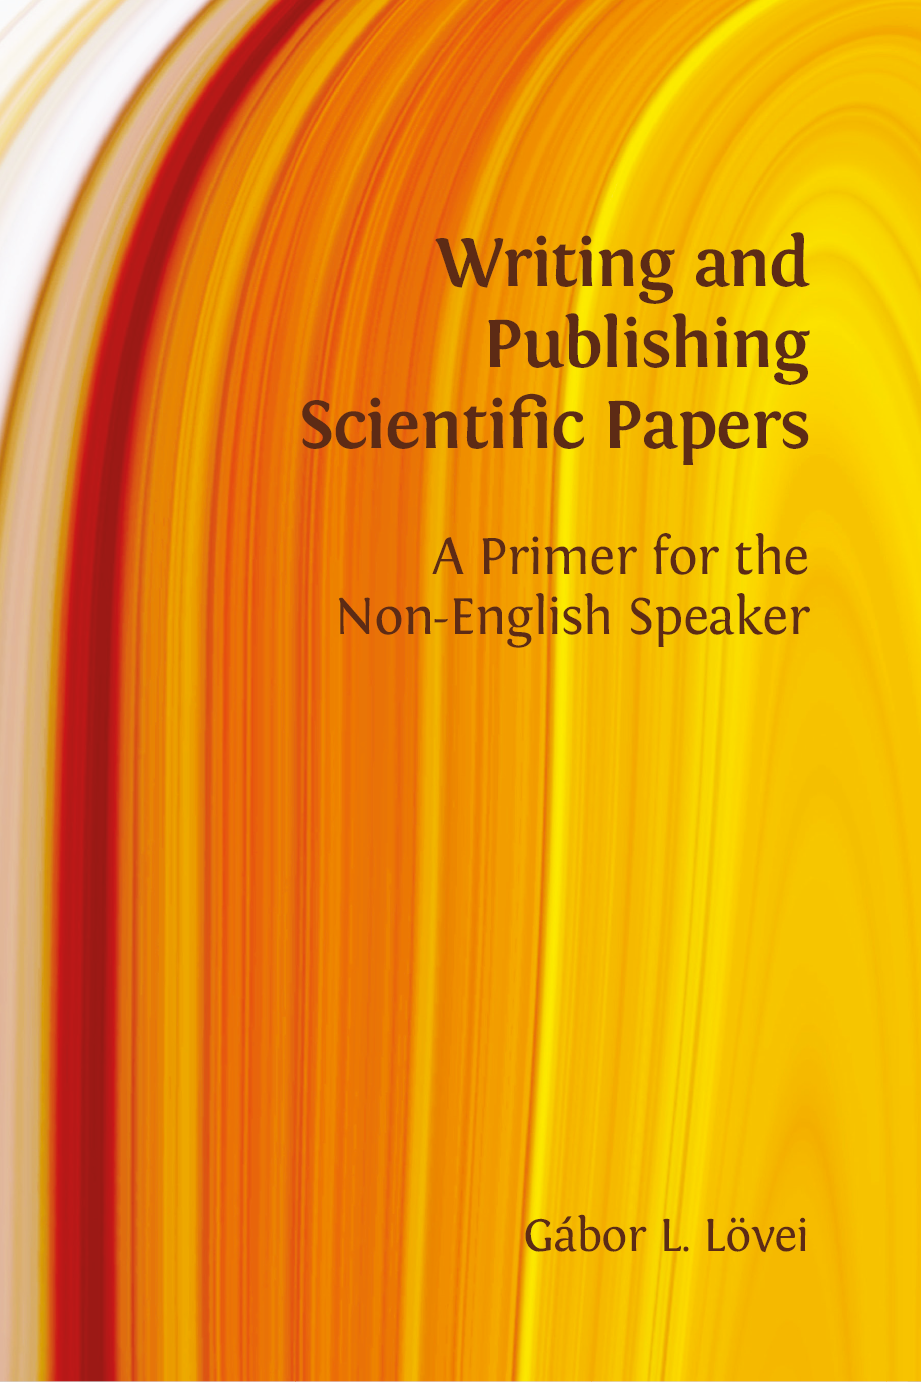 Writing and Publishing Scientific Papers book cover image